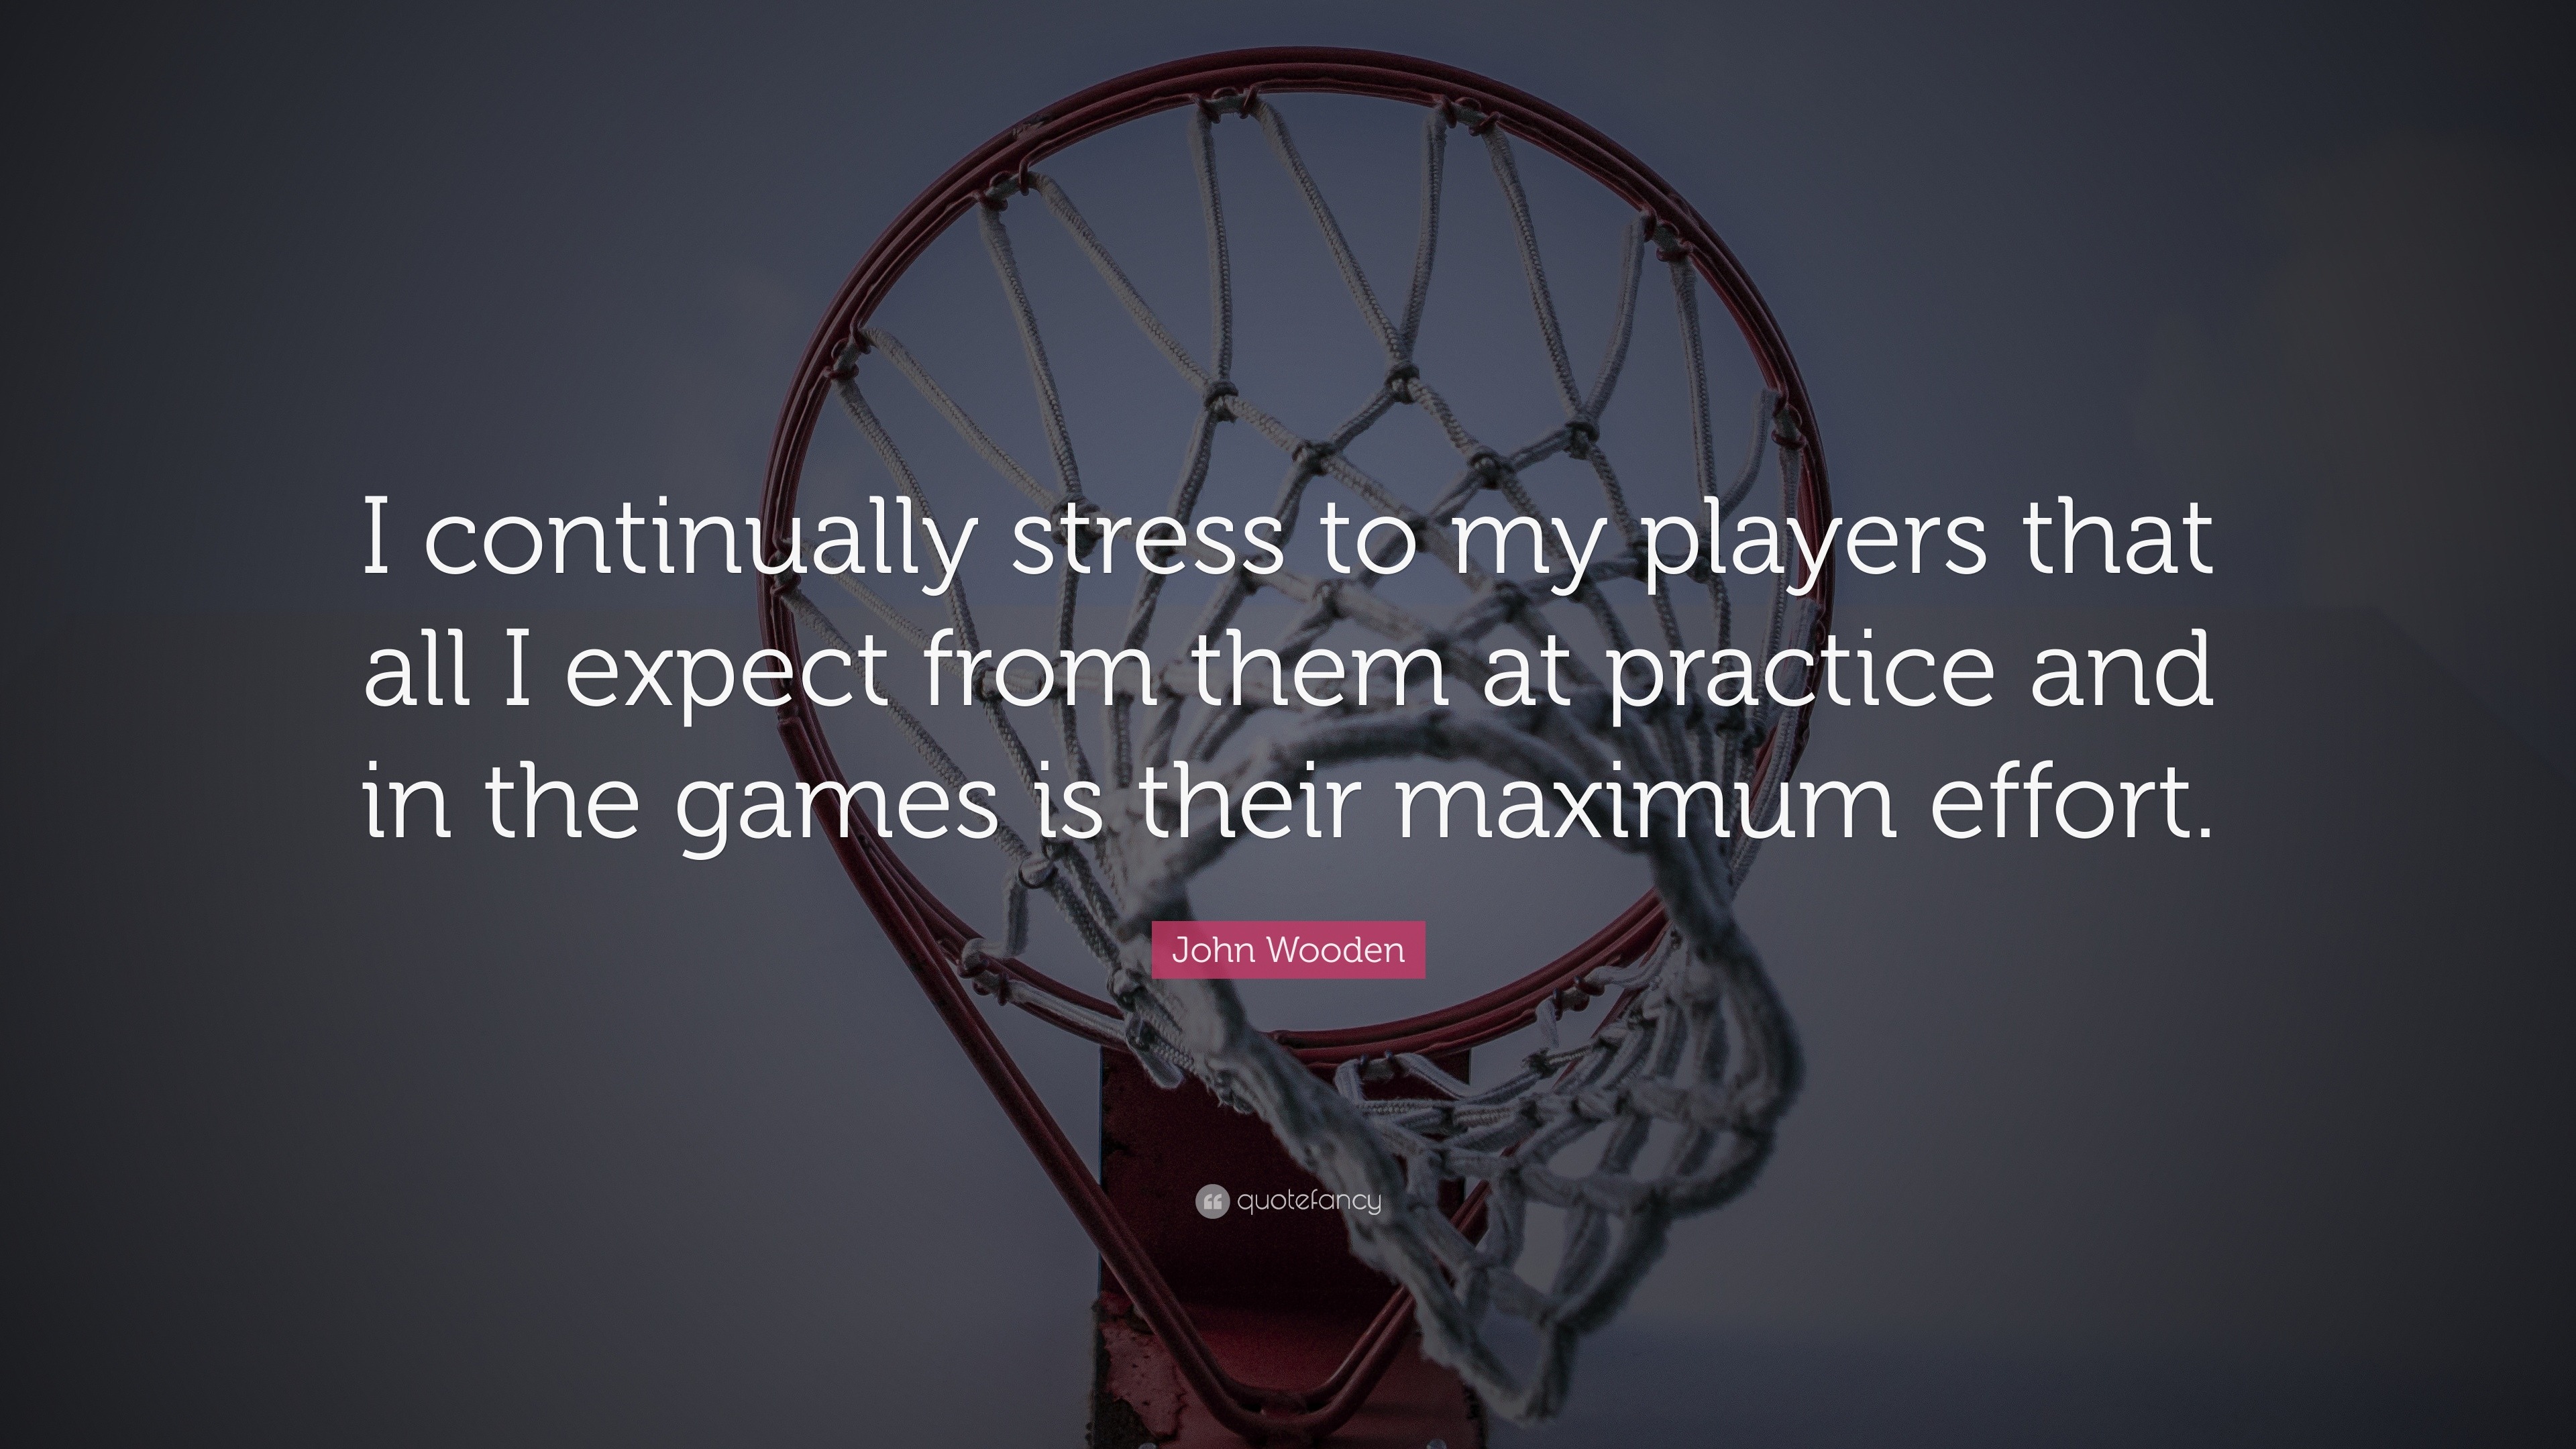 John Wooden Quote: “I continually stress to my players that all I expect  from them at